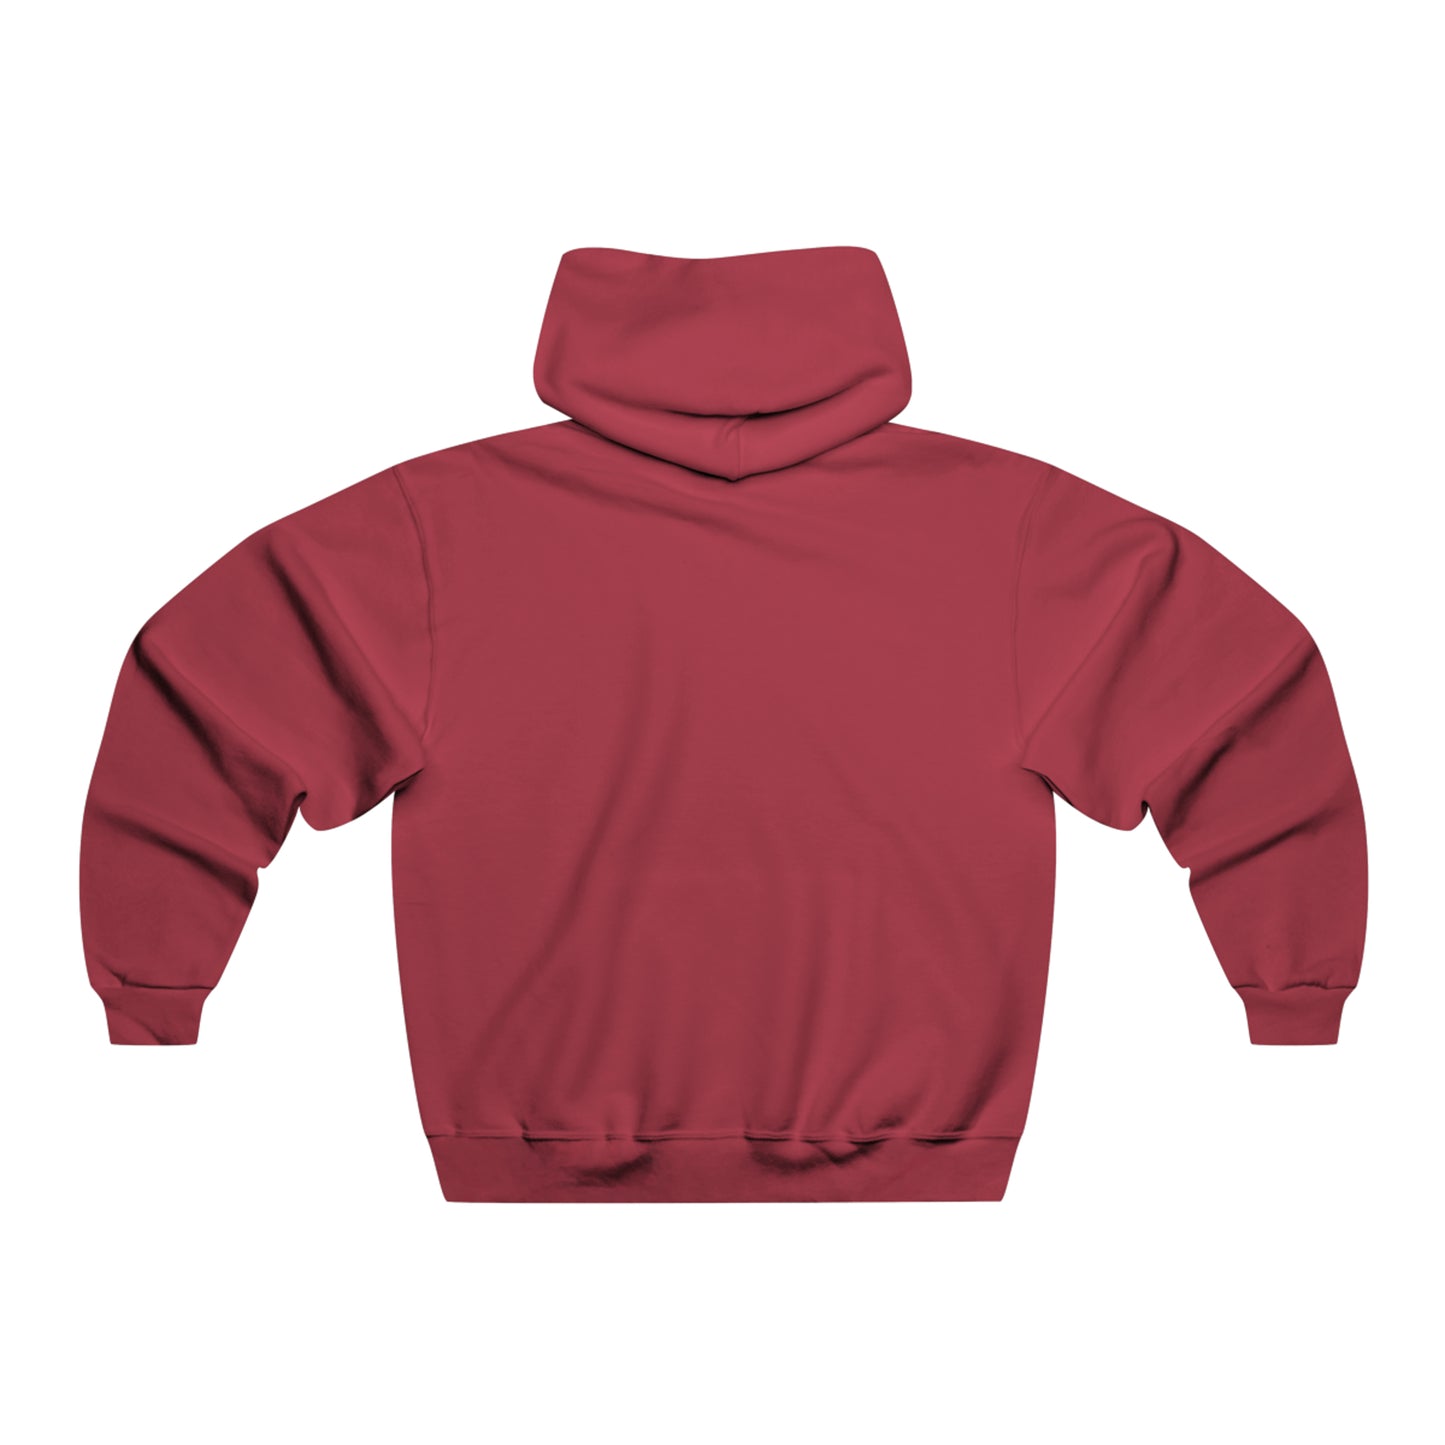 Men's NUBLEND® Hooded Sweatshirt (Take Your Time Abstract)